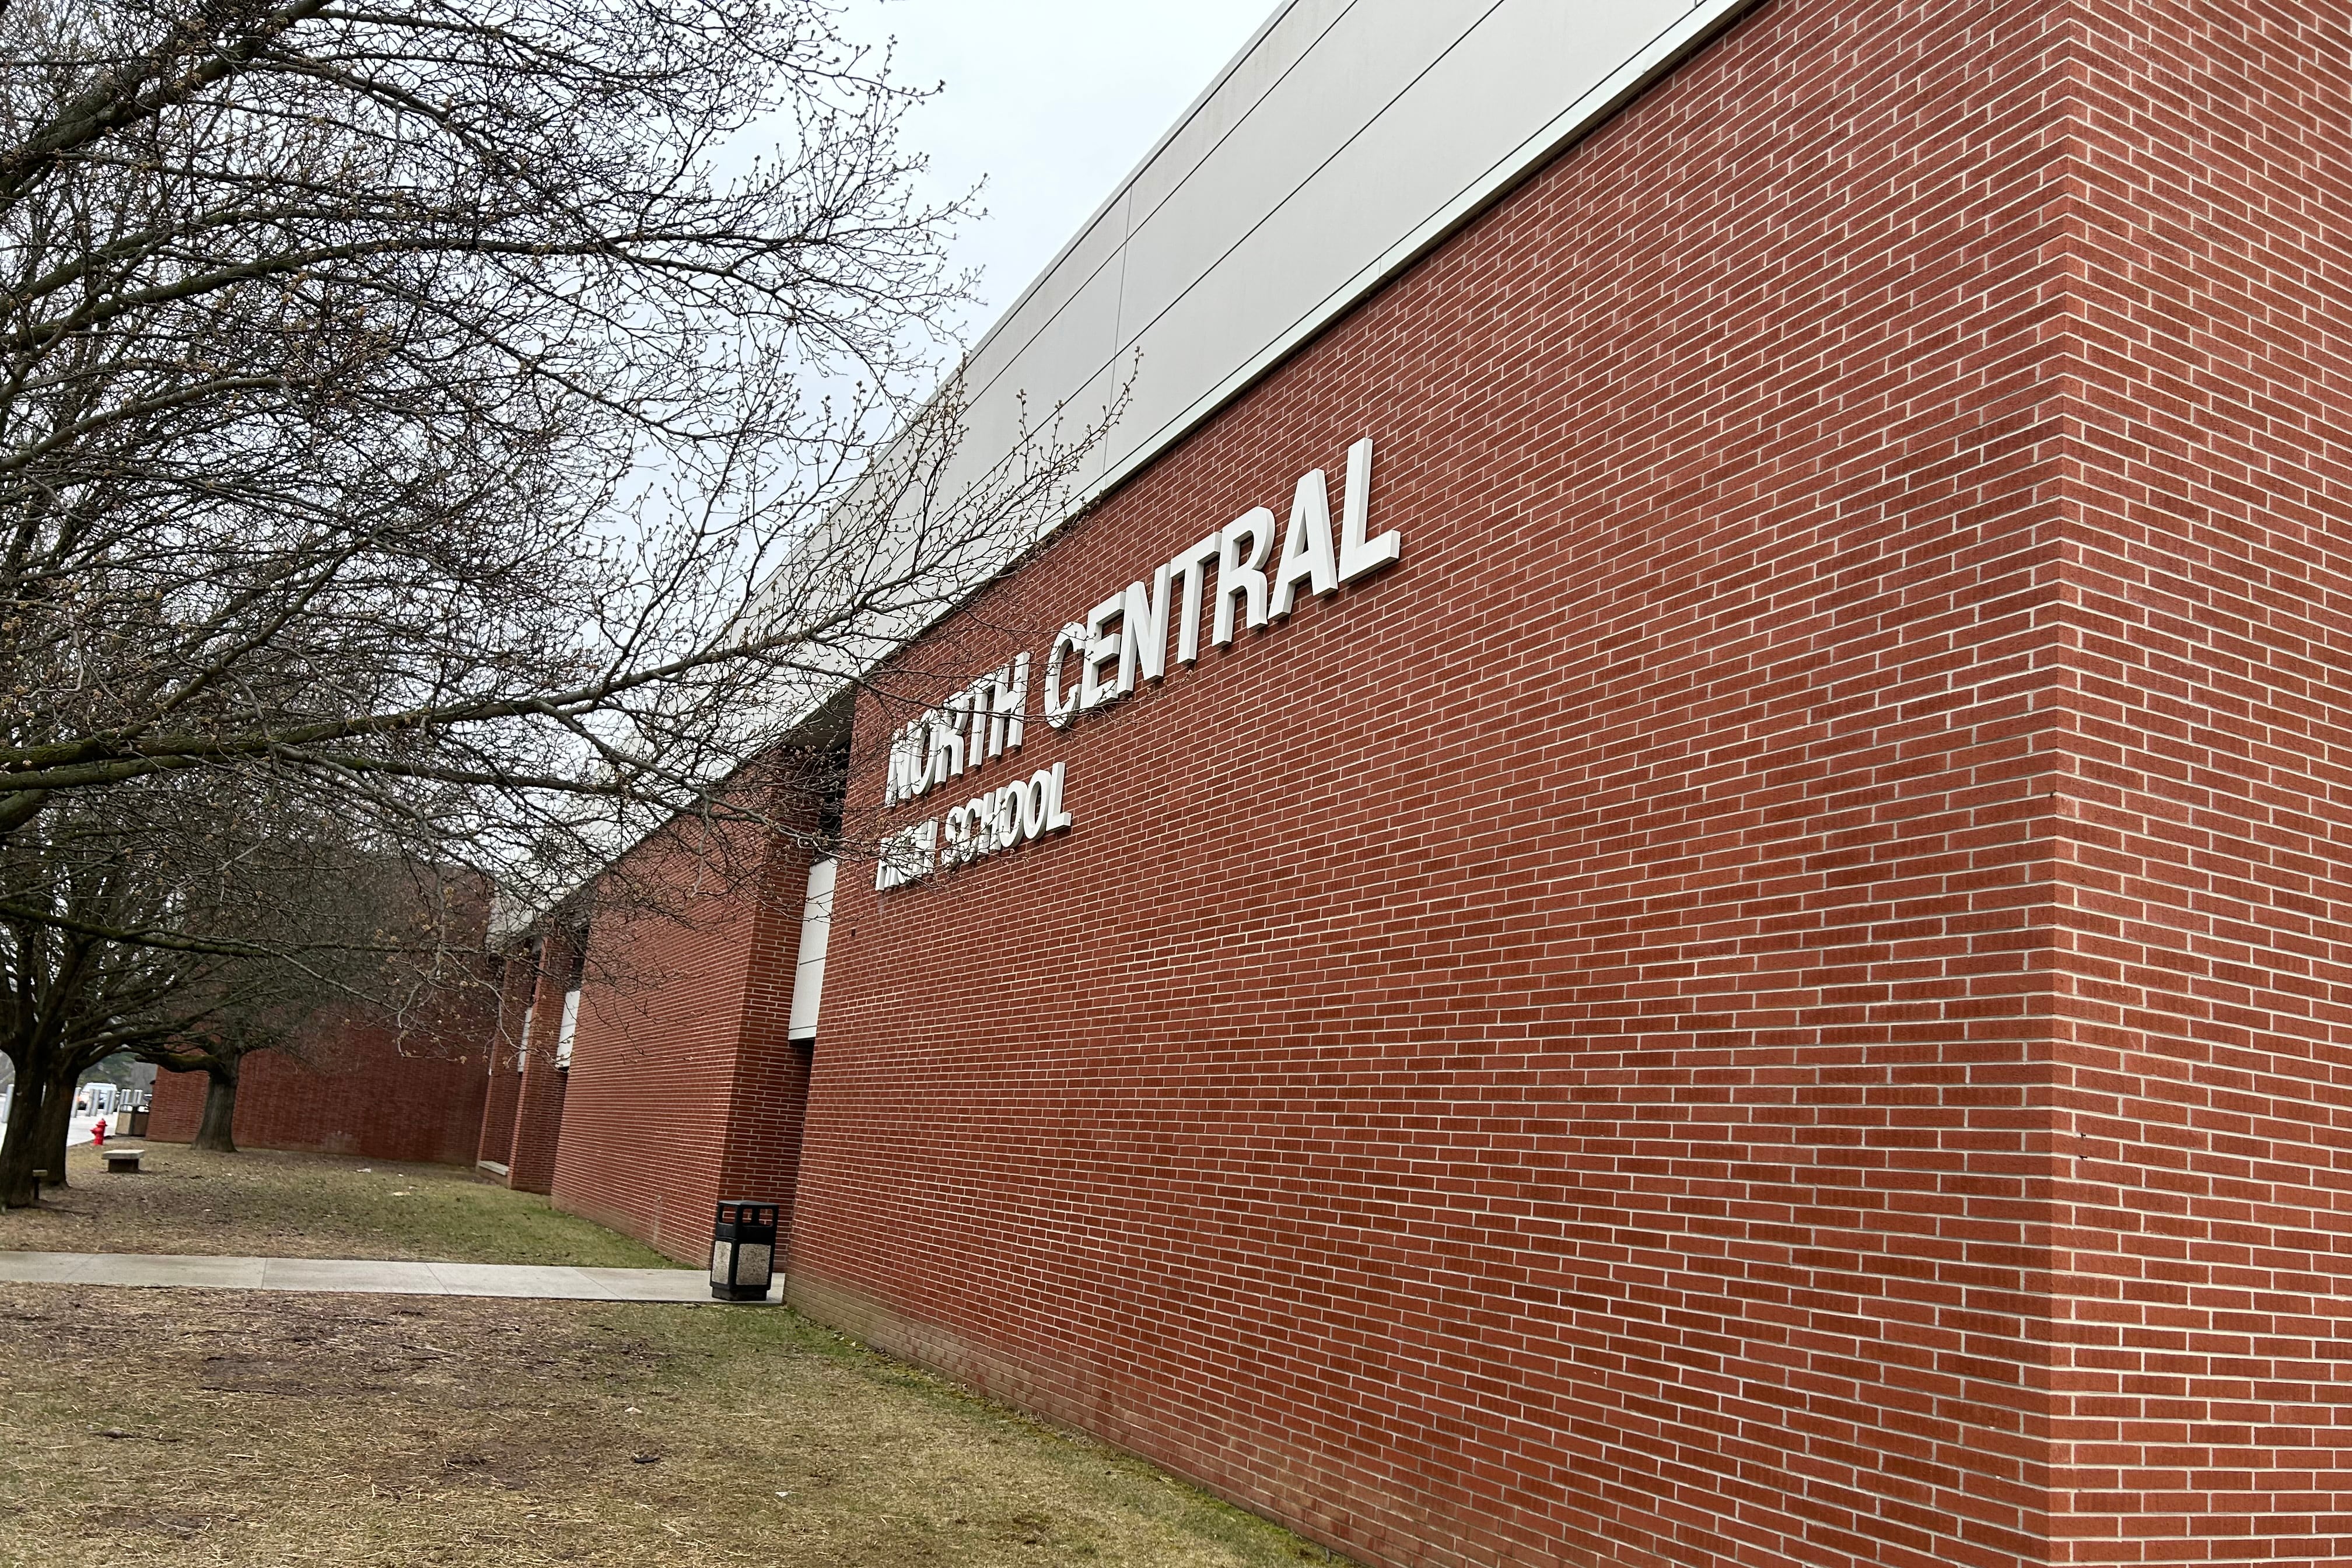 The photo shows a brick building with white letters on it that read “North Central High School.”